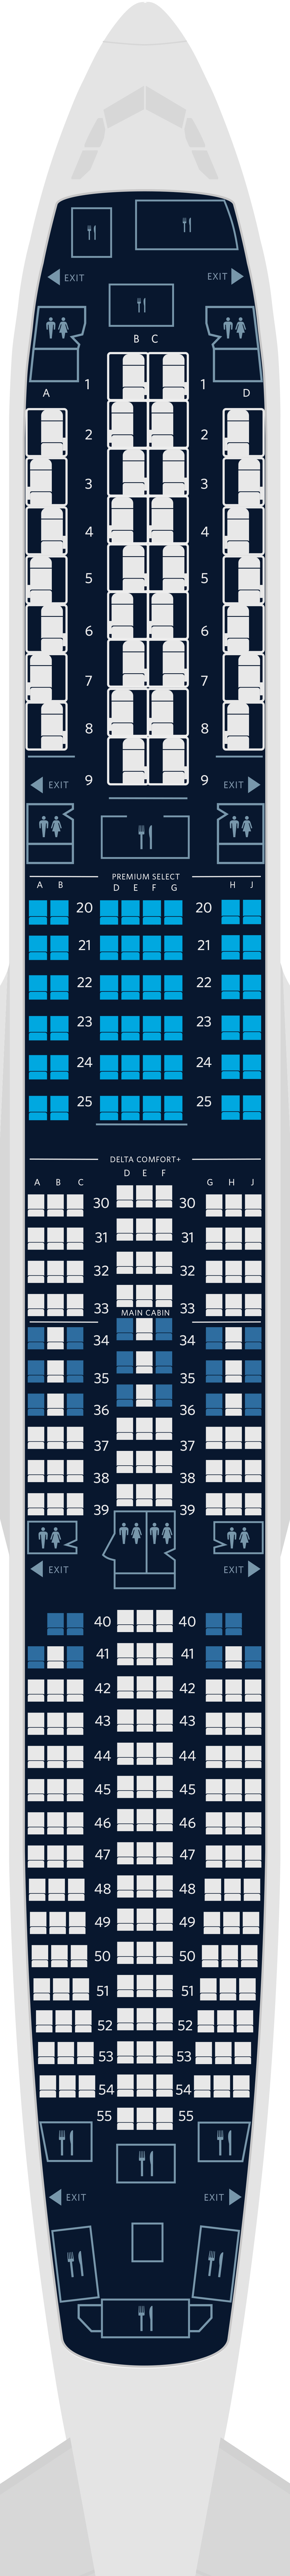  Airbus A350-900 4-Cabin Seat Map